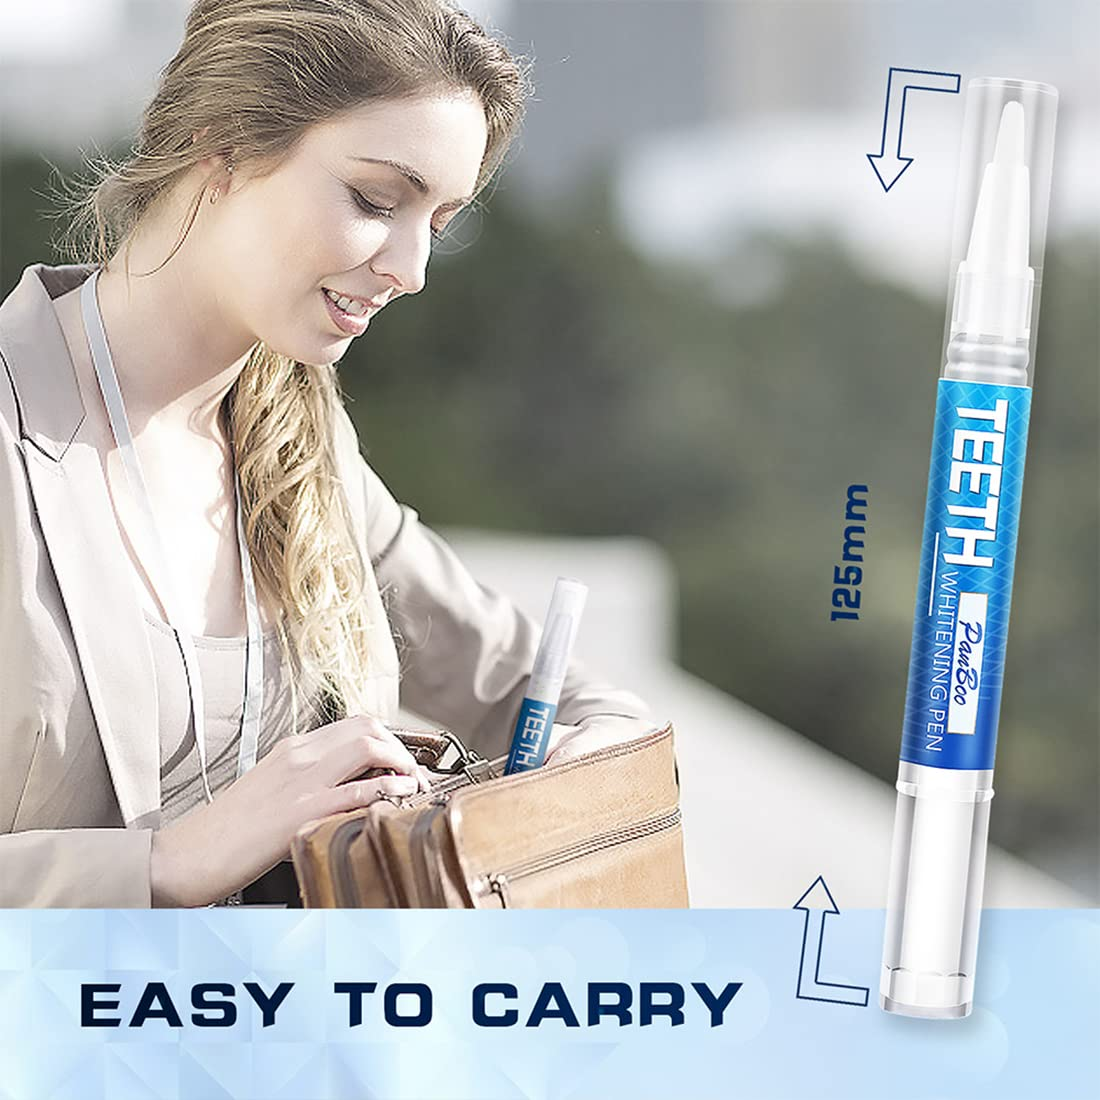 Teeth Whitening Pen, Use Twice a Day up to 1-6 Shade Whiter in 1-2 Weeks, 4 No Sensitivity Pens, 70+ Whitening Treatments, Effective, Pain Free and Enamel Safe, Easy to Use at Home Travel, Flavourless